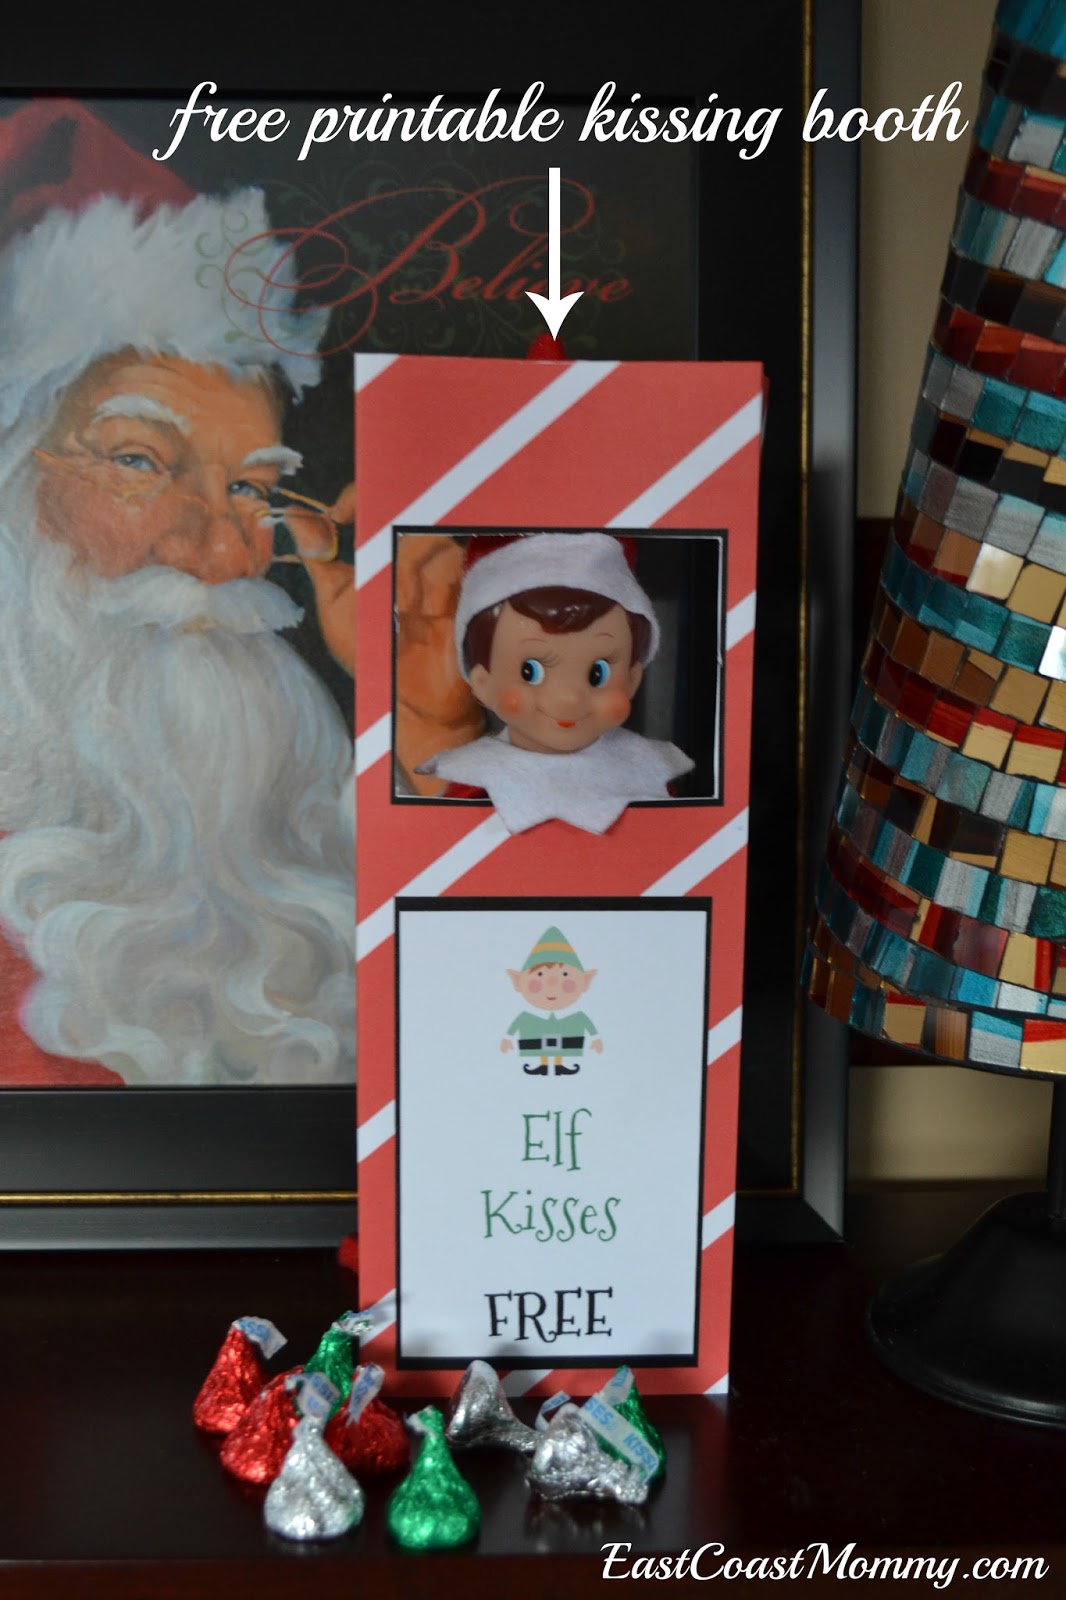 east-coast-mommy-elf-on-the-shelf-kissing-booth-free-printable